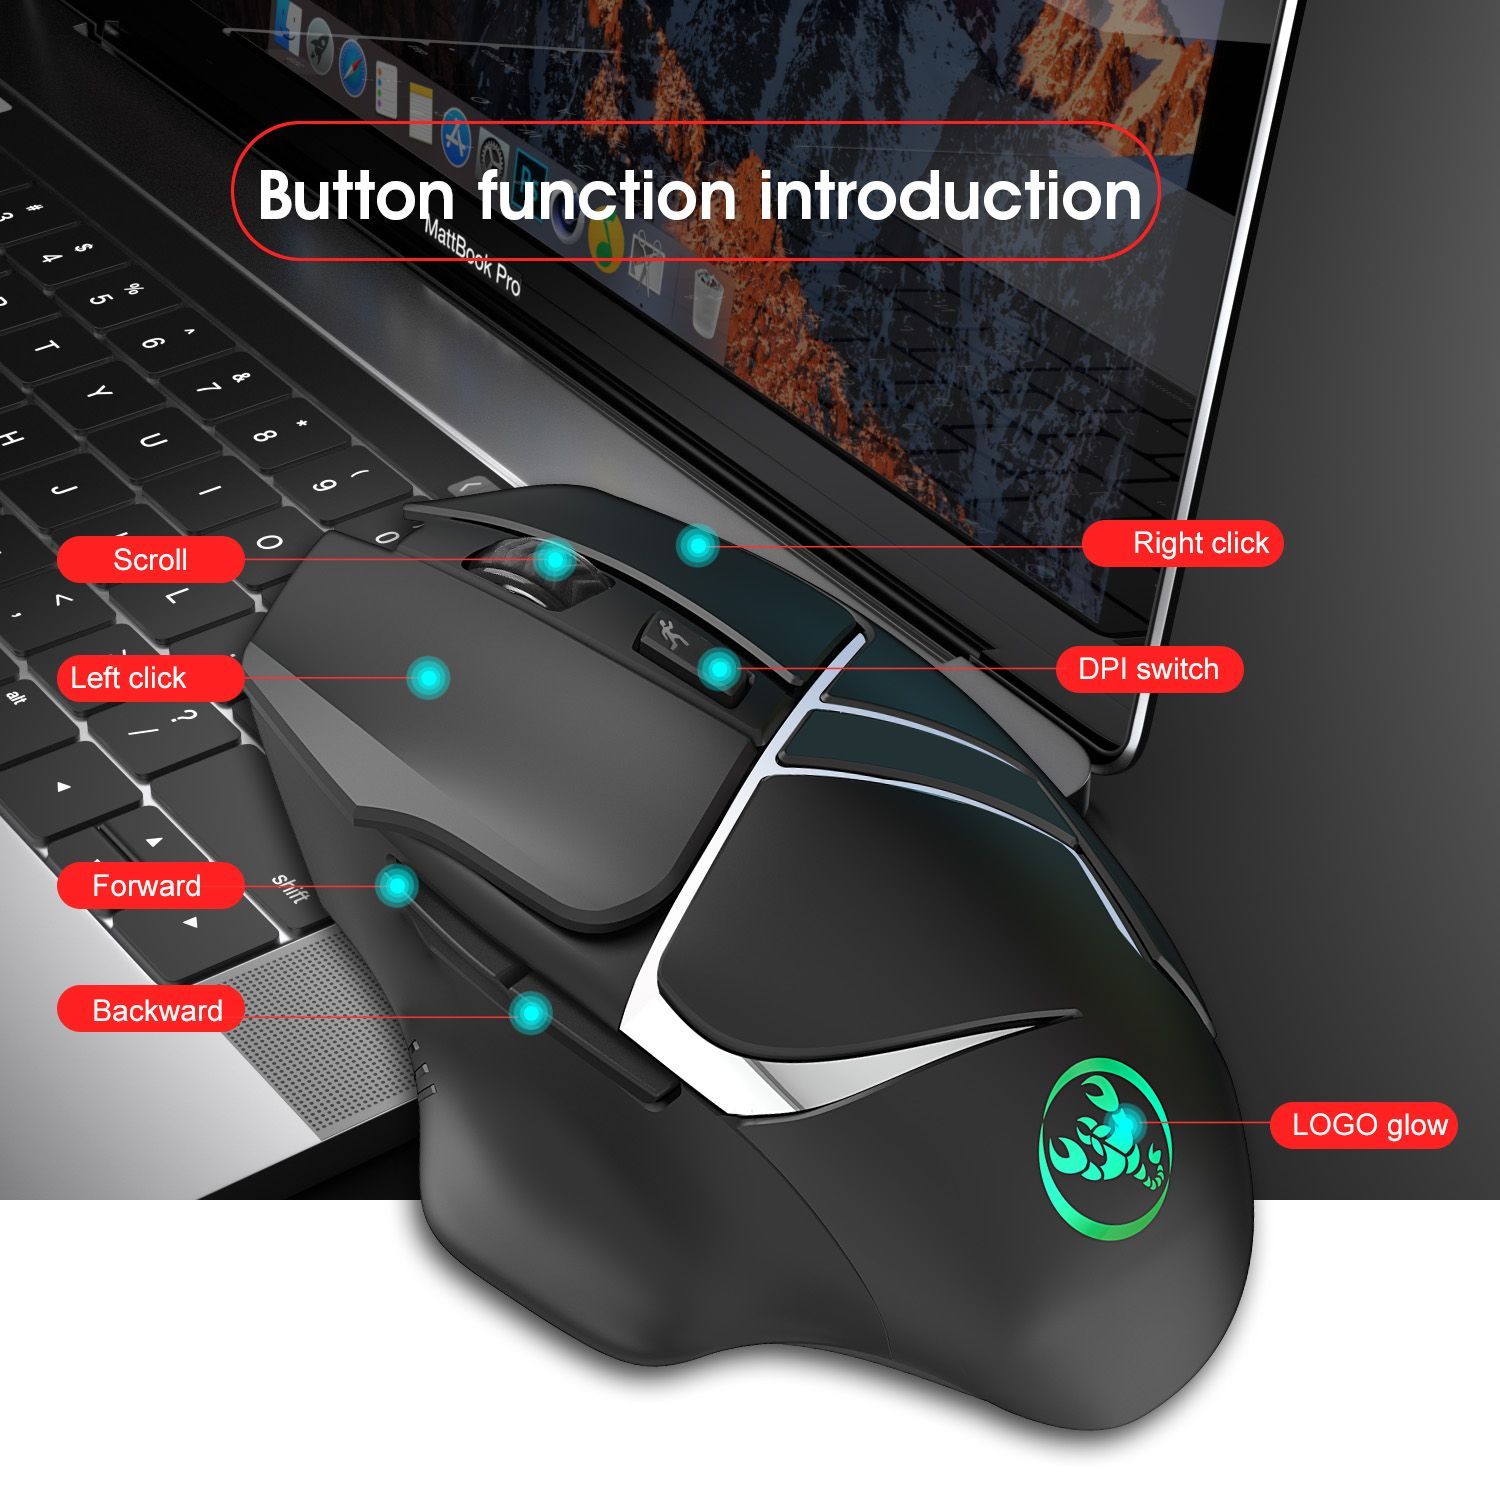 HXSJ-T60-Wireless-Gaming-Mouse-24G-Rechargable-2400Dpi-6Keys-RGB-Lumious-Gaming-Mouse-For-Laptop-Des-1765859